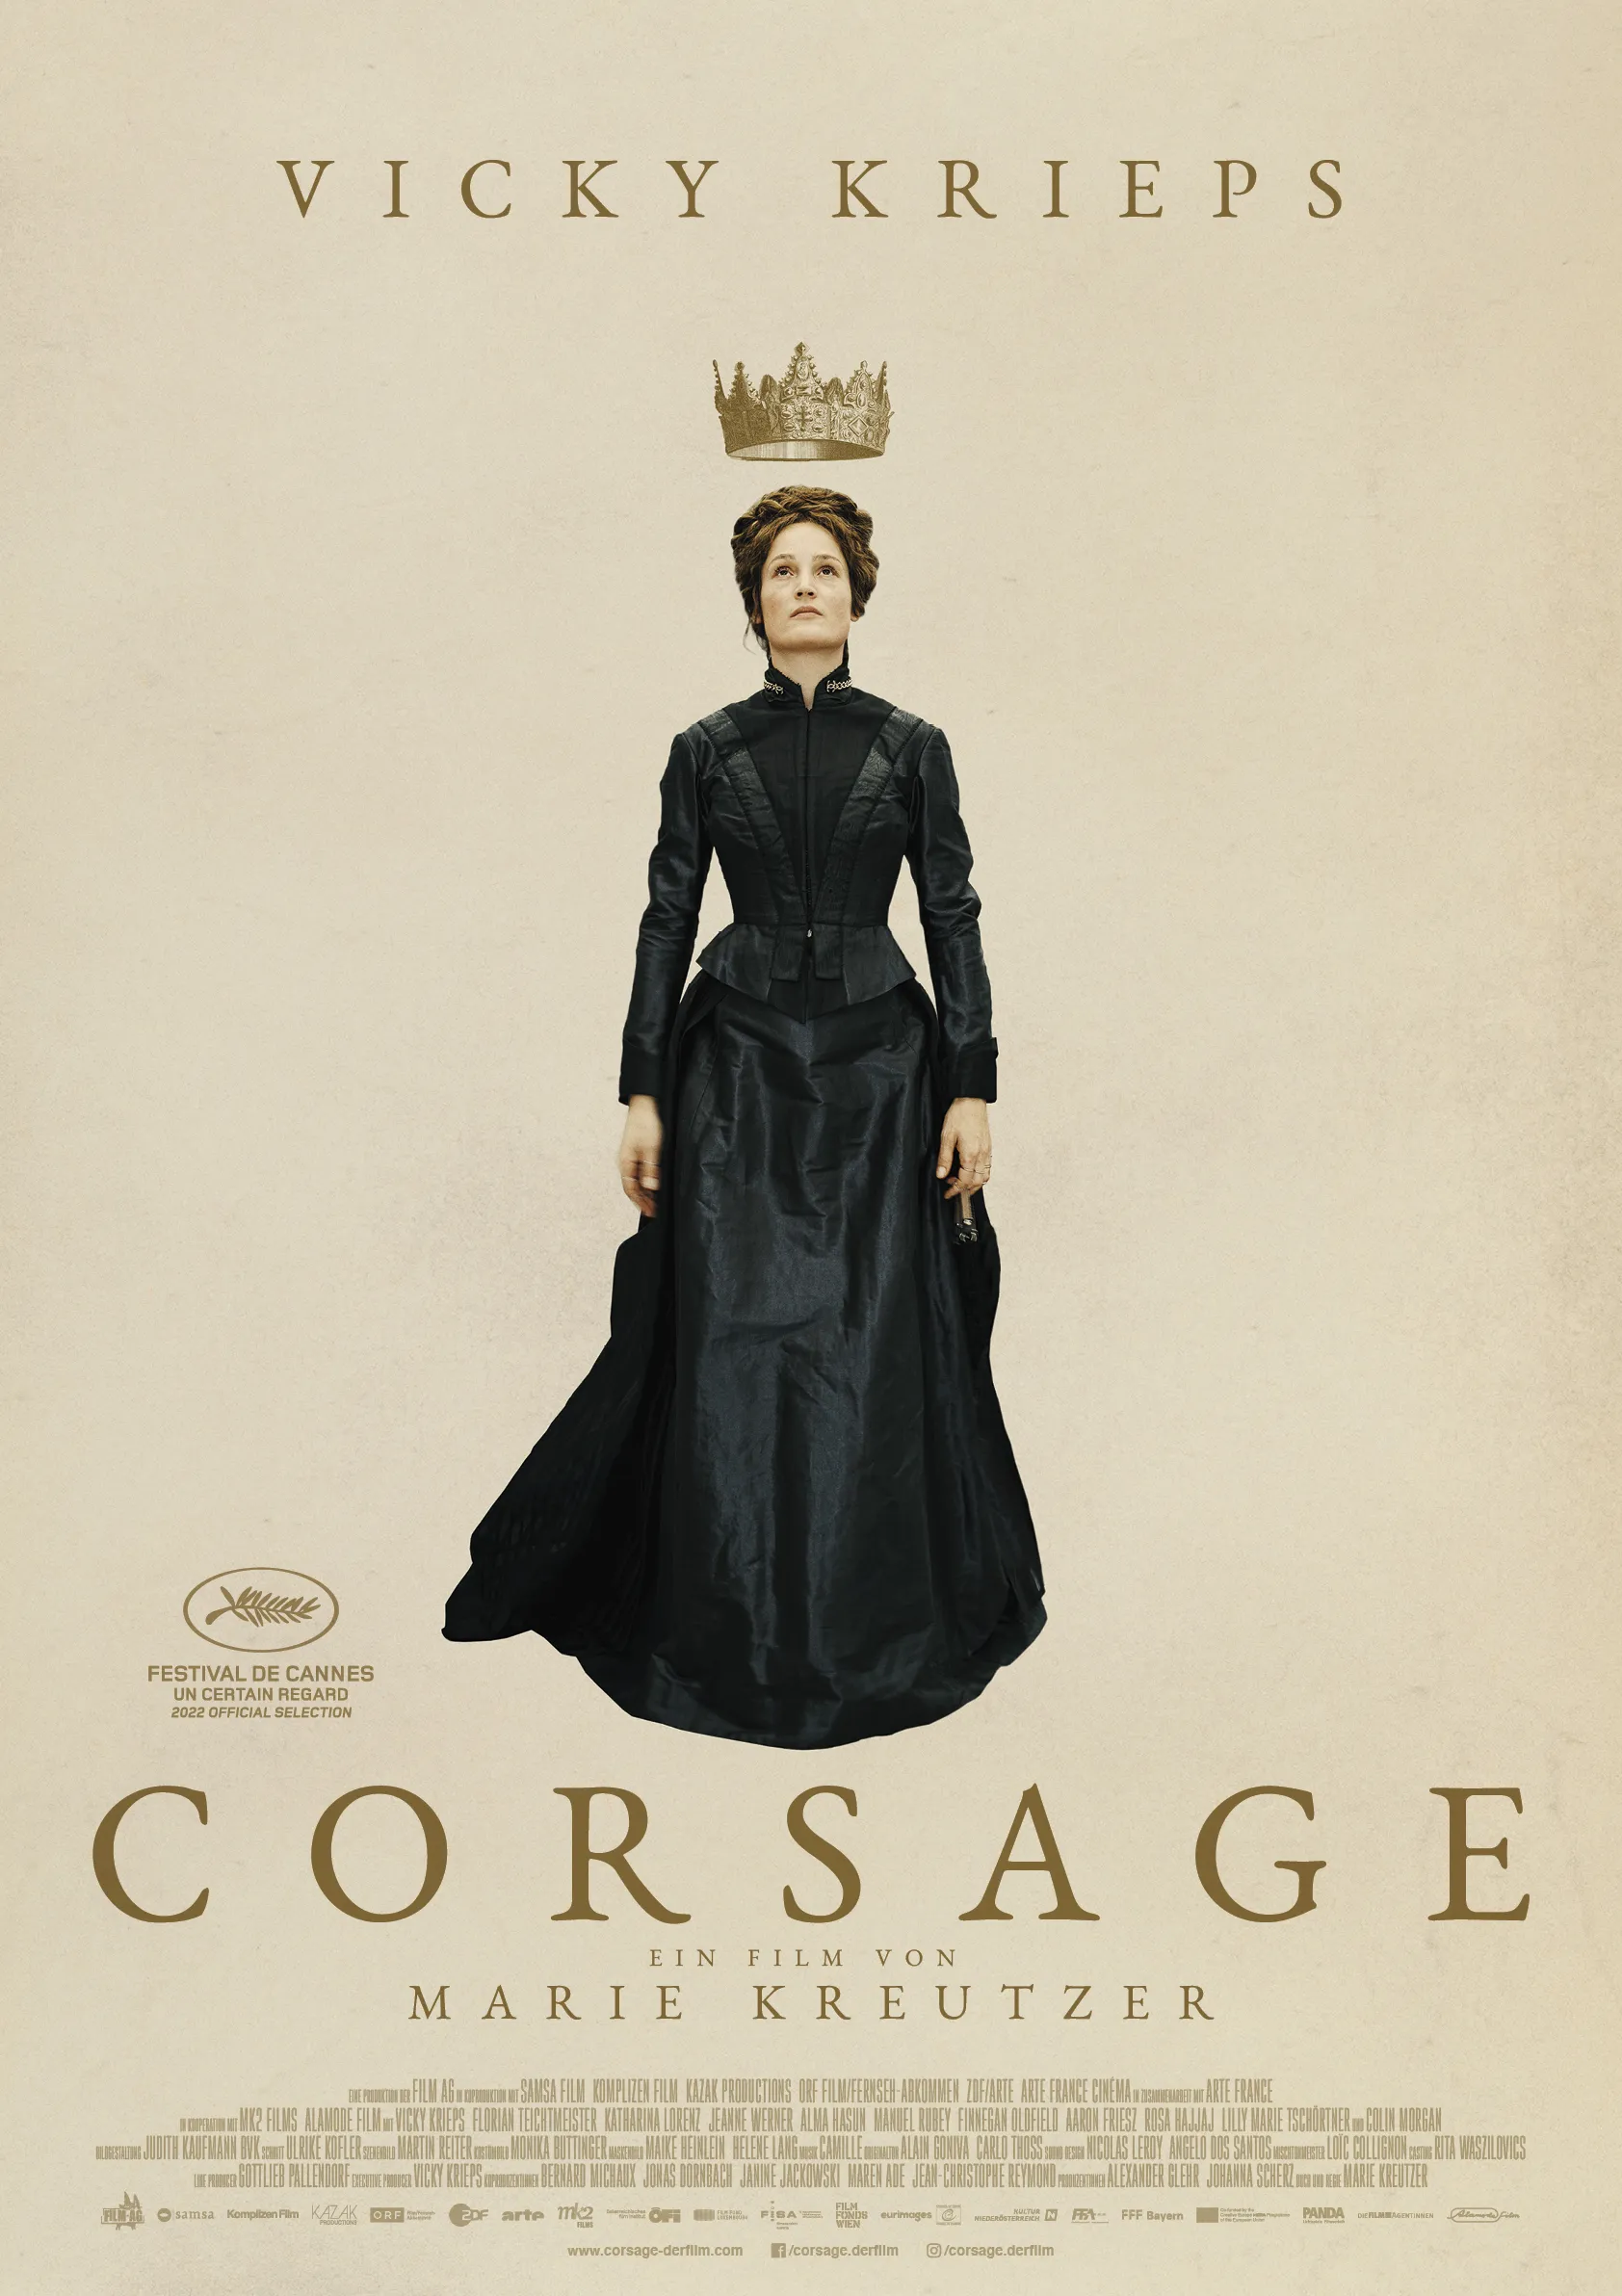 New film 'Corsage' featuring 'Empress Elisabeth' releases Official Trailer | FMV6